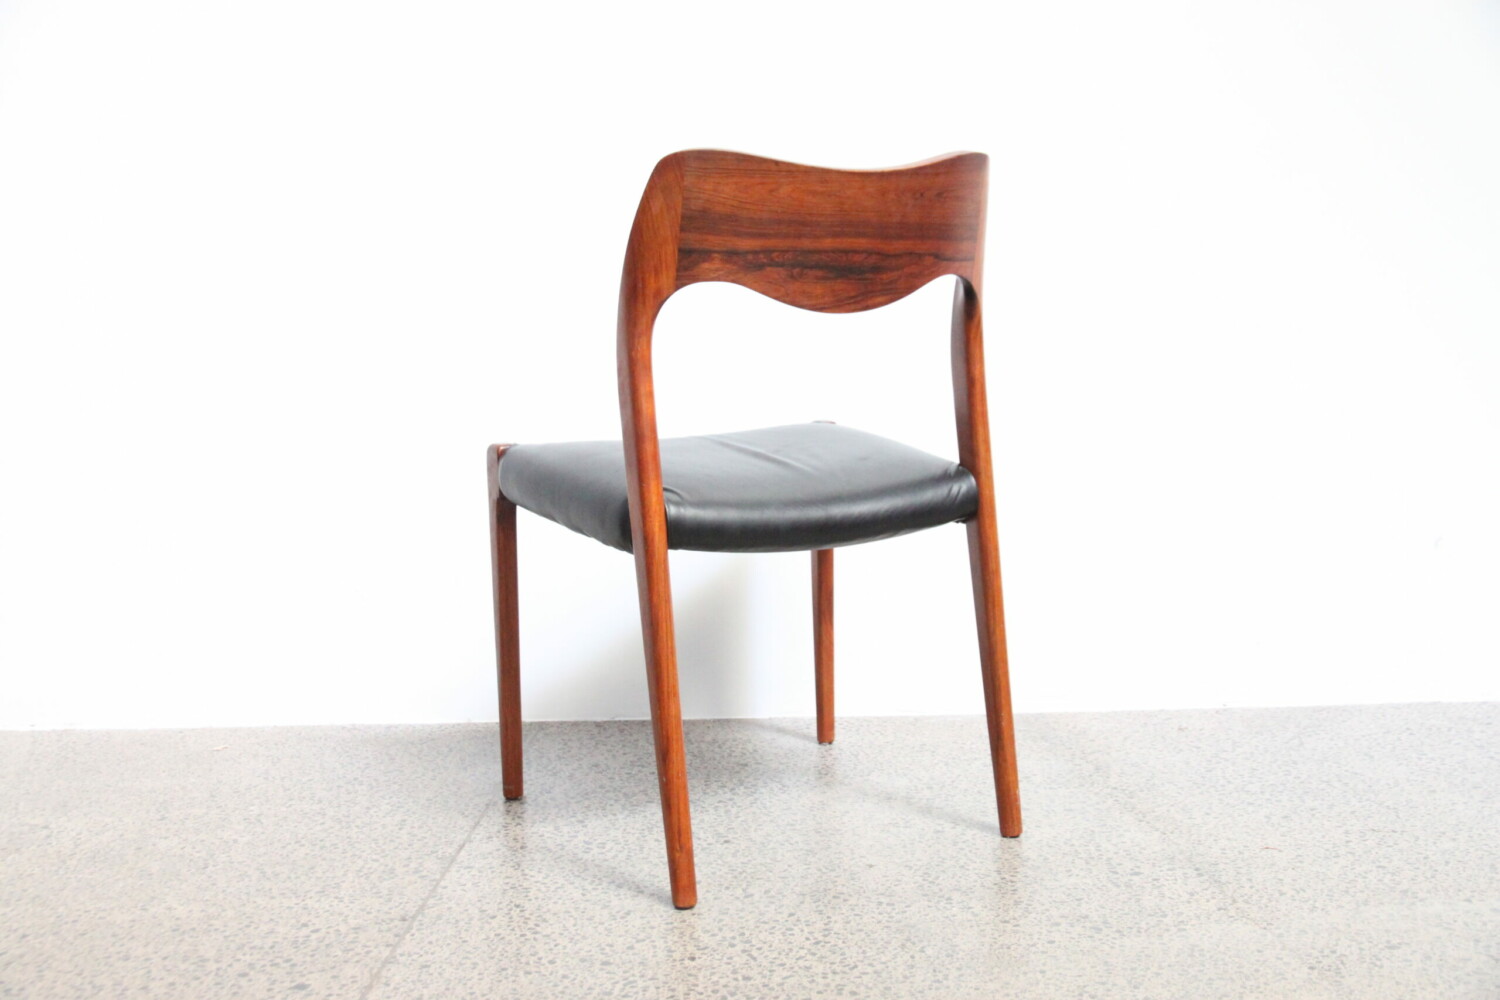 X8 Dining Chairs by Niels Moller Model 71 with Leather